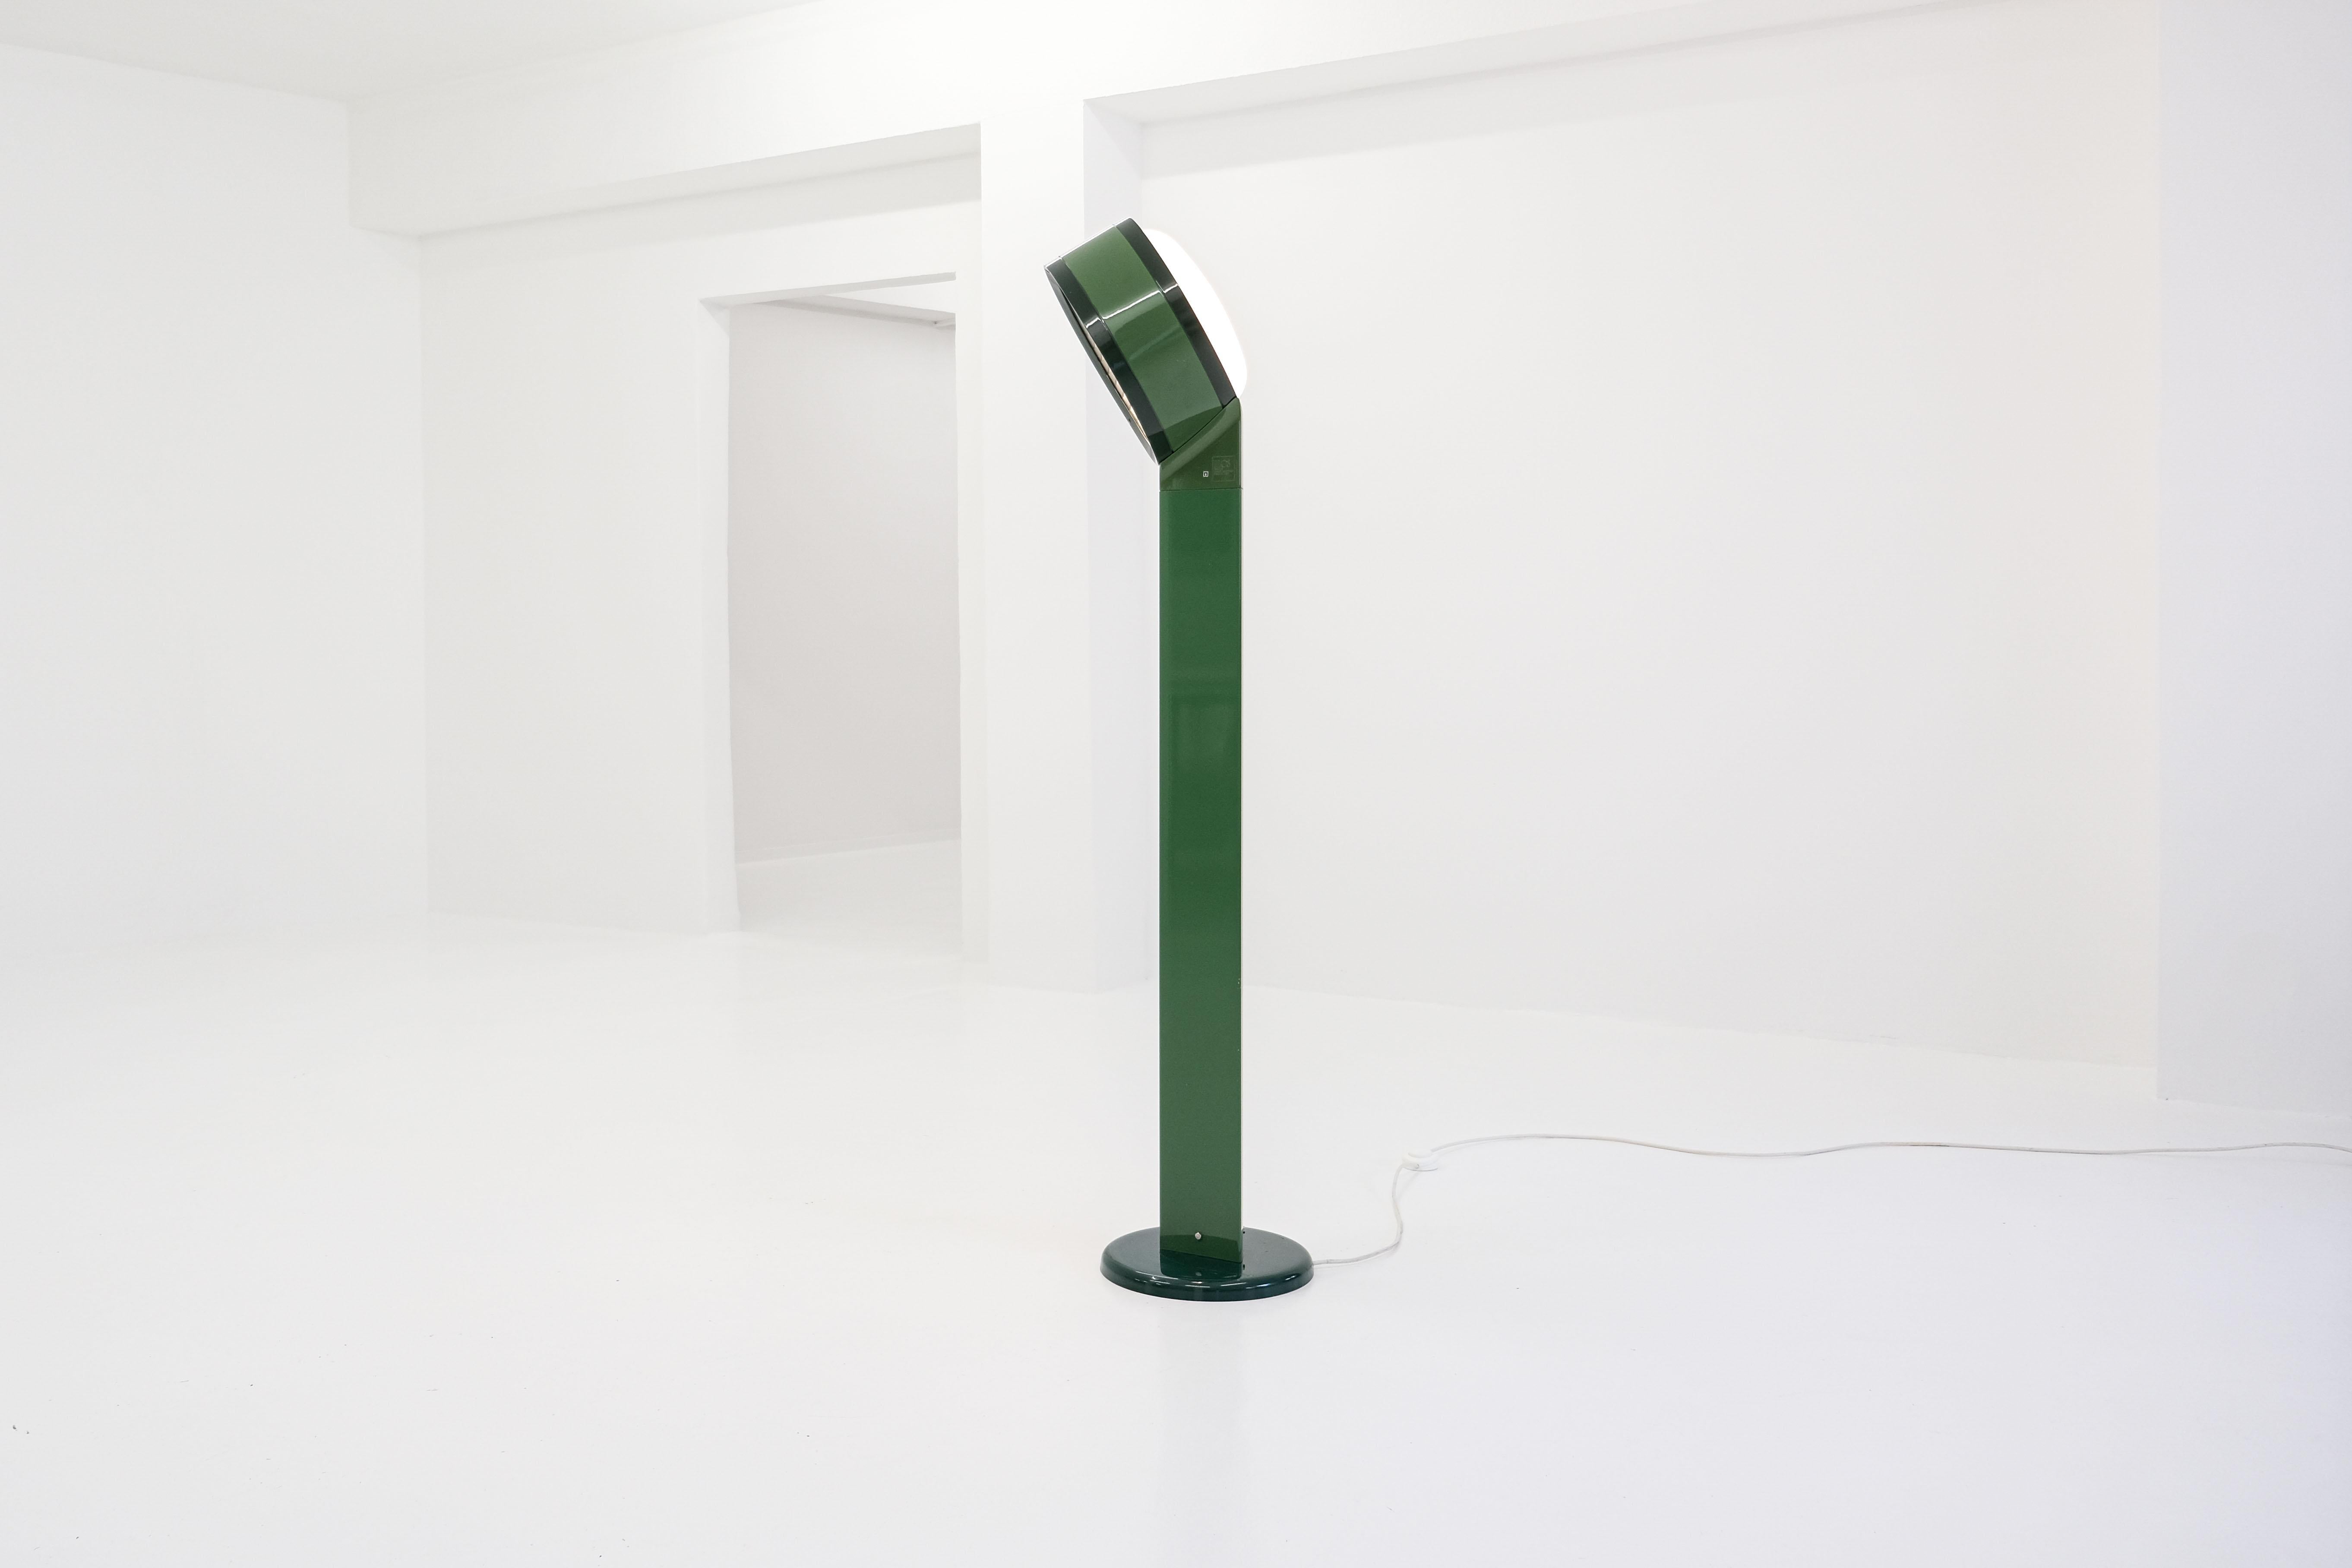 Italian Tamburo Floor Lamp by Afra & Tobia Scarpa for Flos for Inside and Outside Use